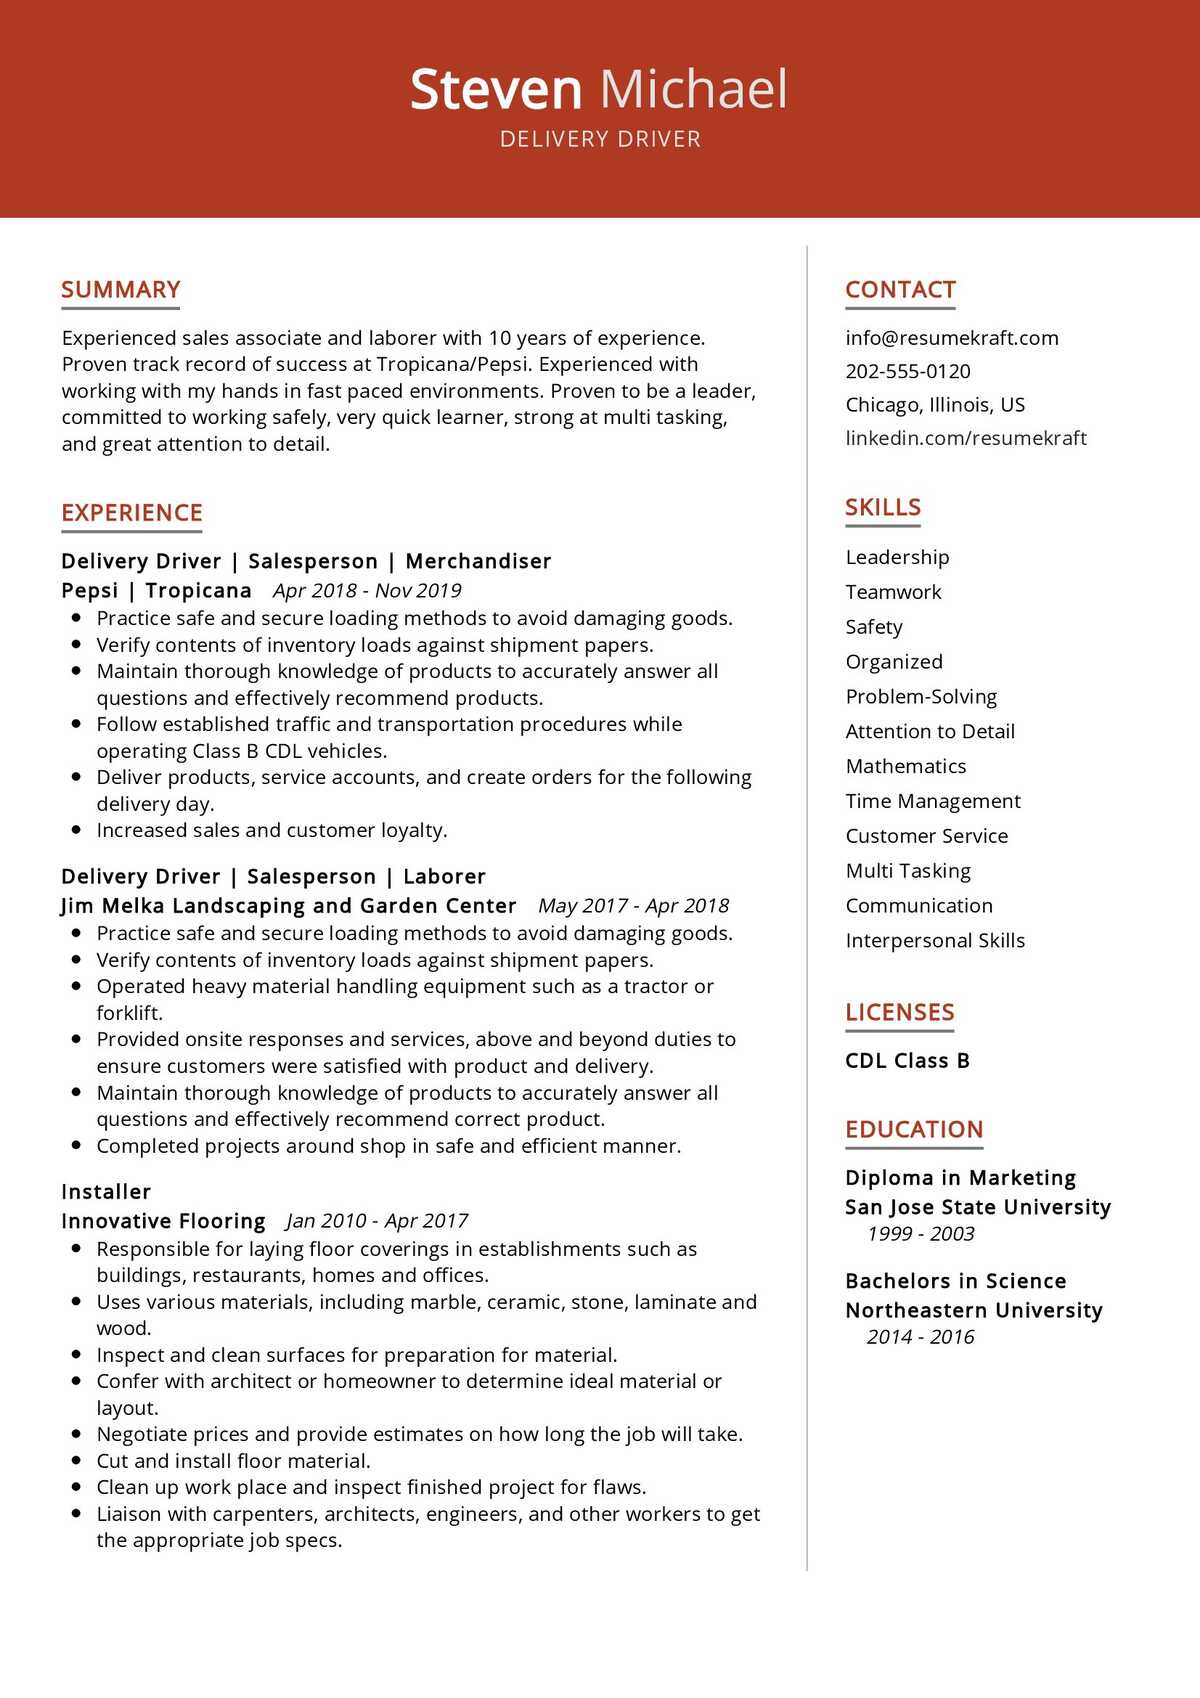 Order Process and Ship Resume Sample Delivery Driver Resume Sample 2021 Writing Guide & Tips …